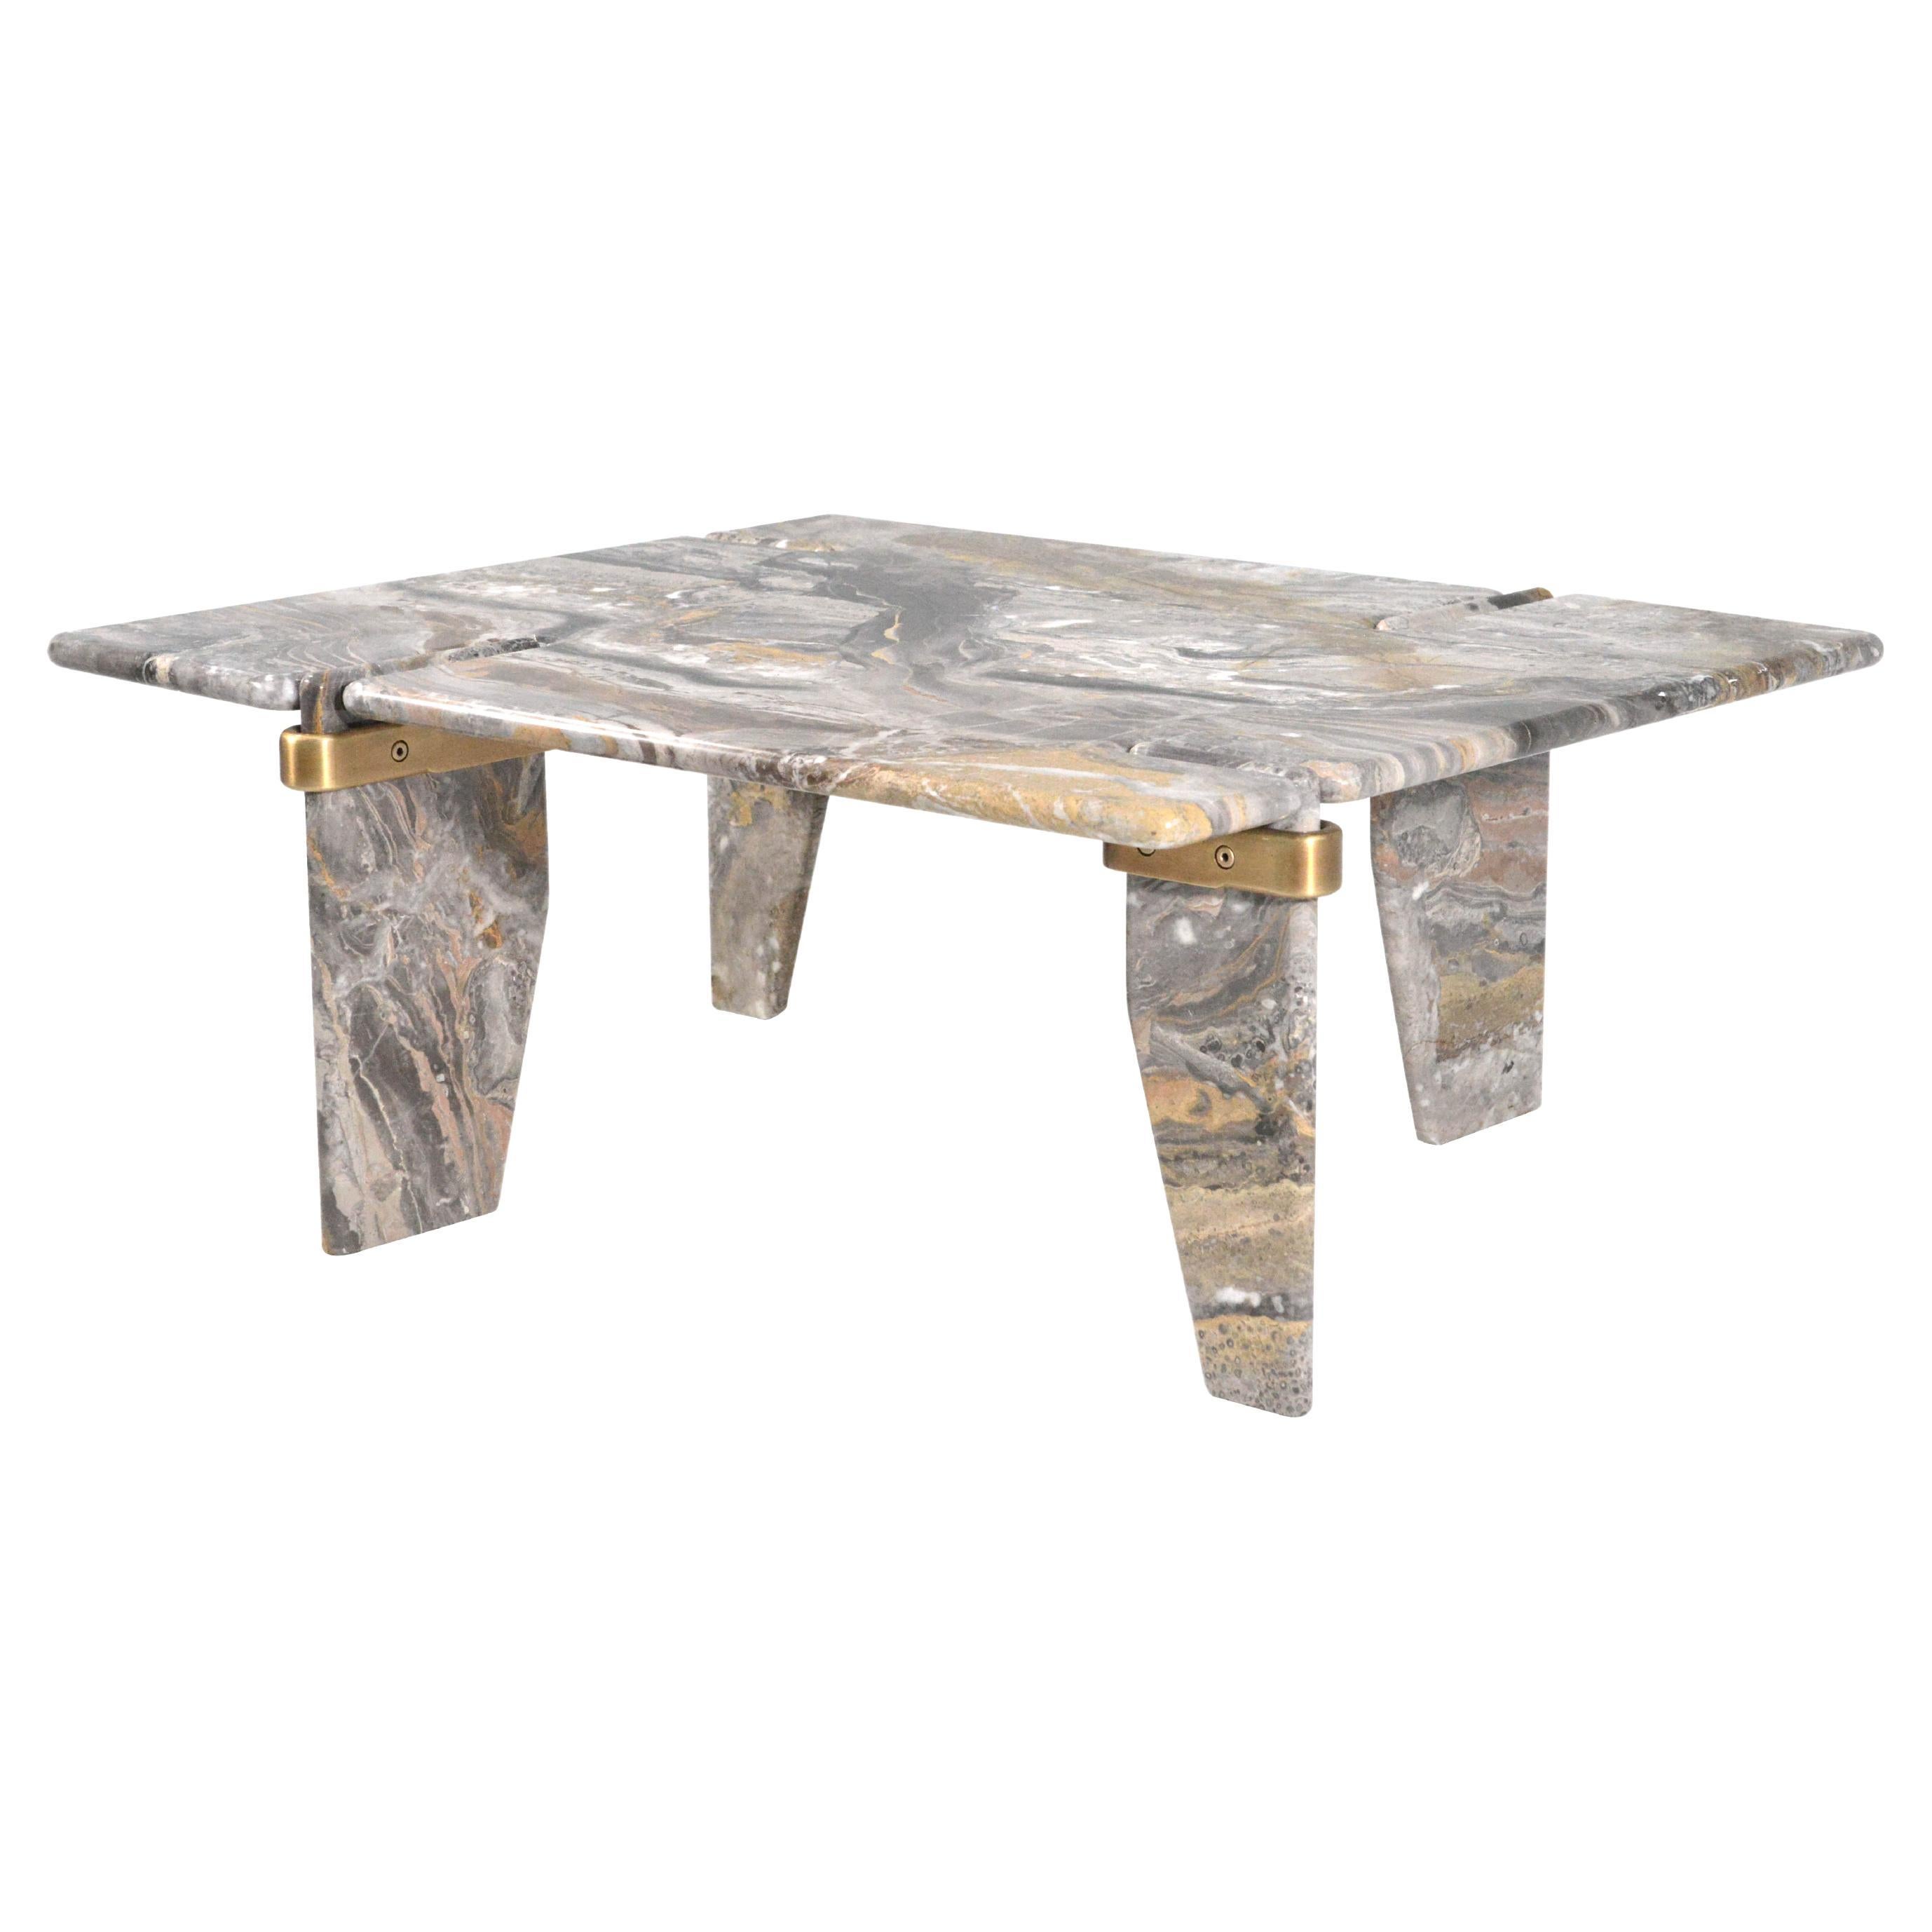 Contemporary Coffee Table by Hessentia in "Arabescato Orobico" Marble